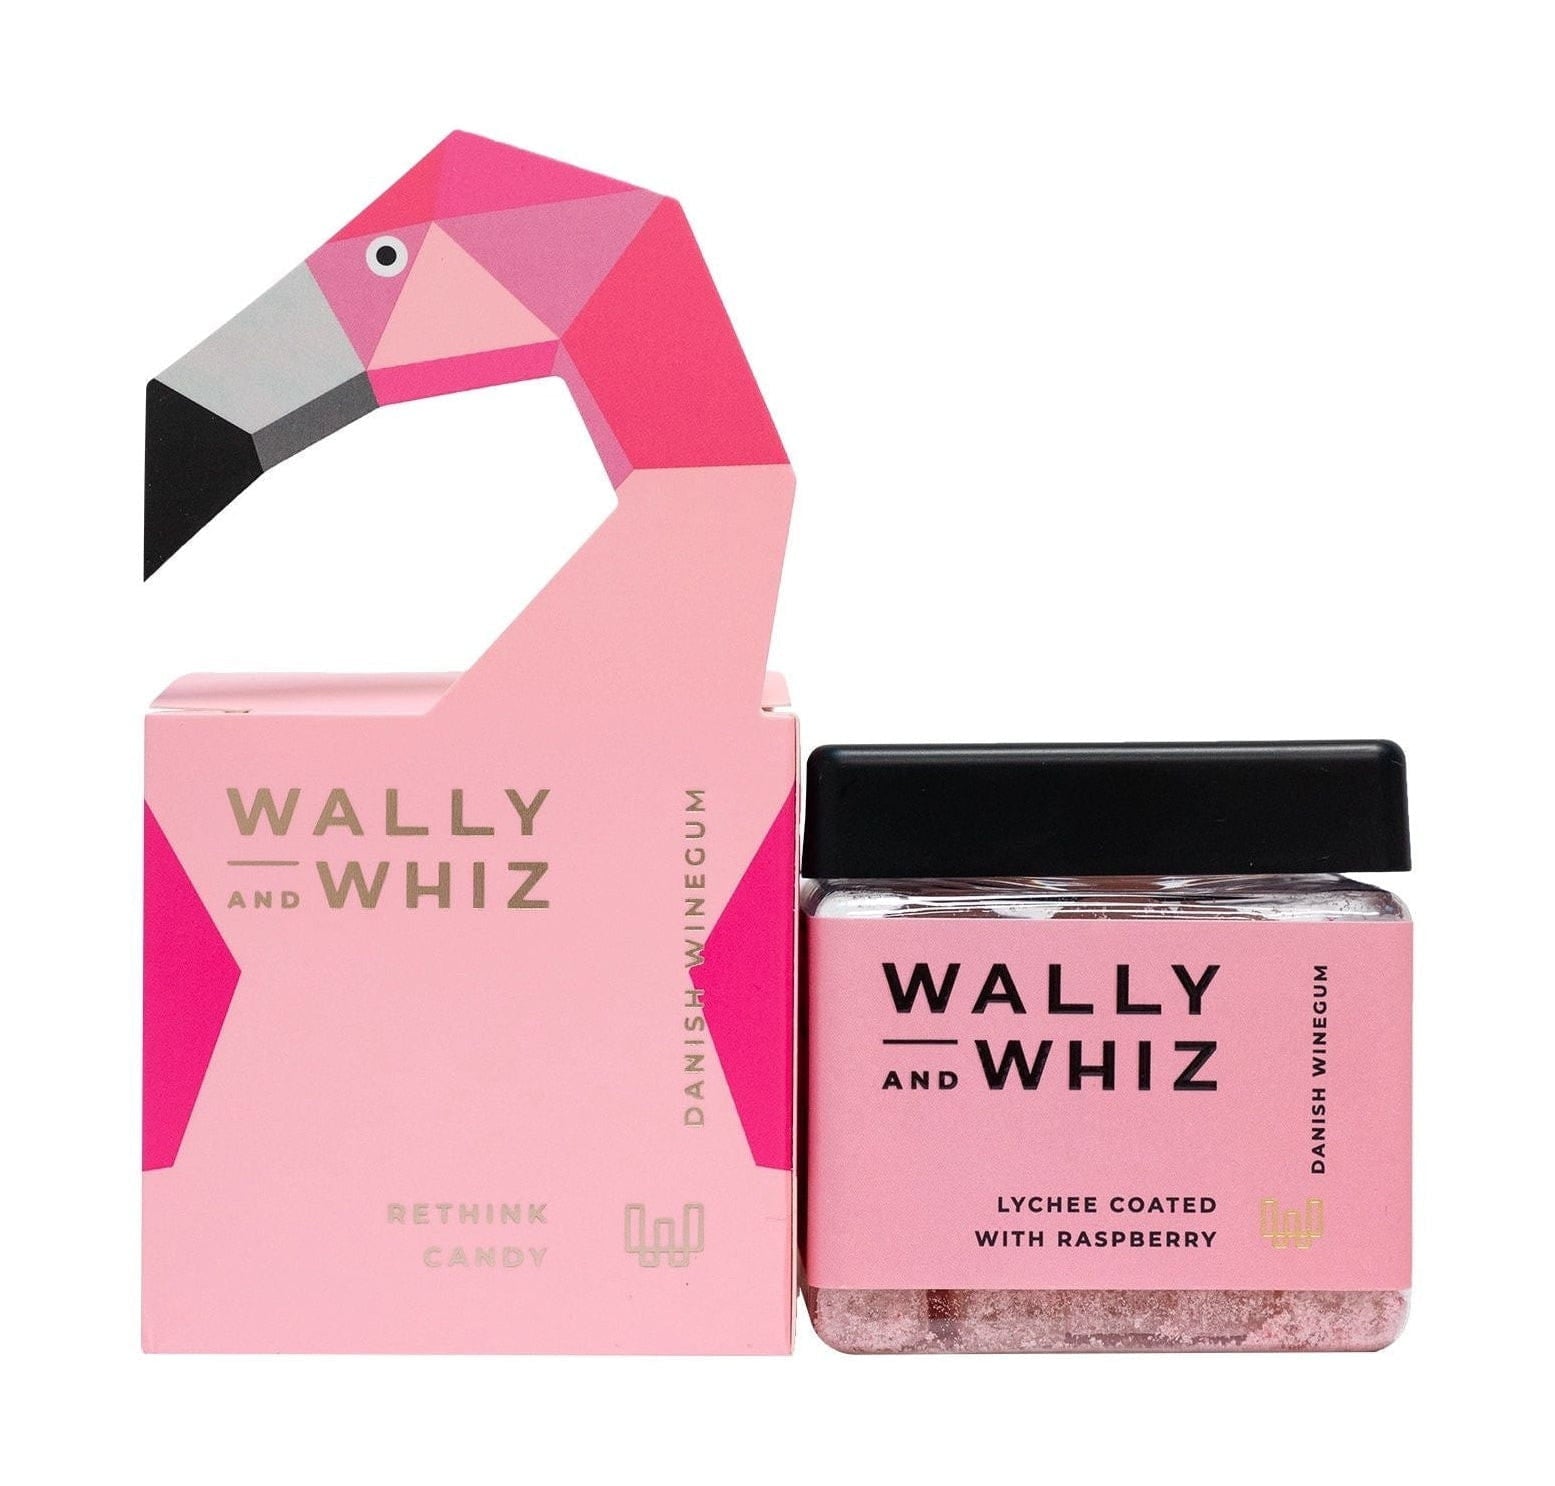 Wally and Whiz Wine Gum Cube, Lychee rosa fenicottero con lampone, 140G